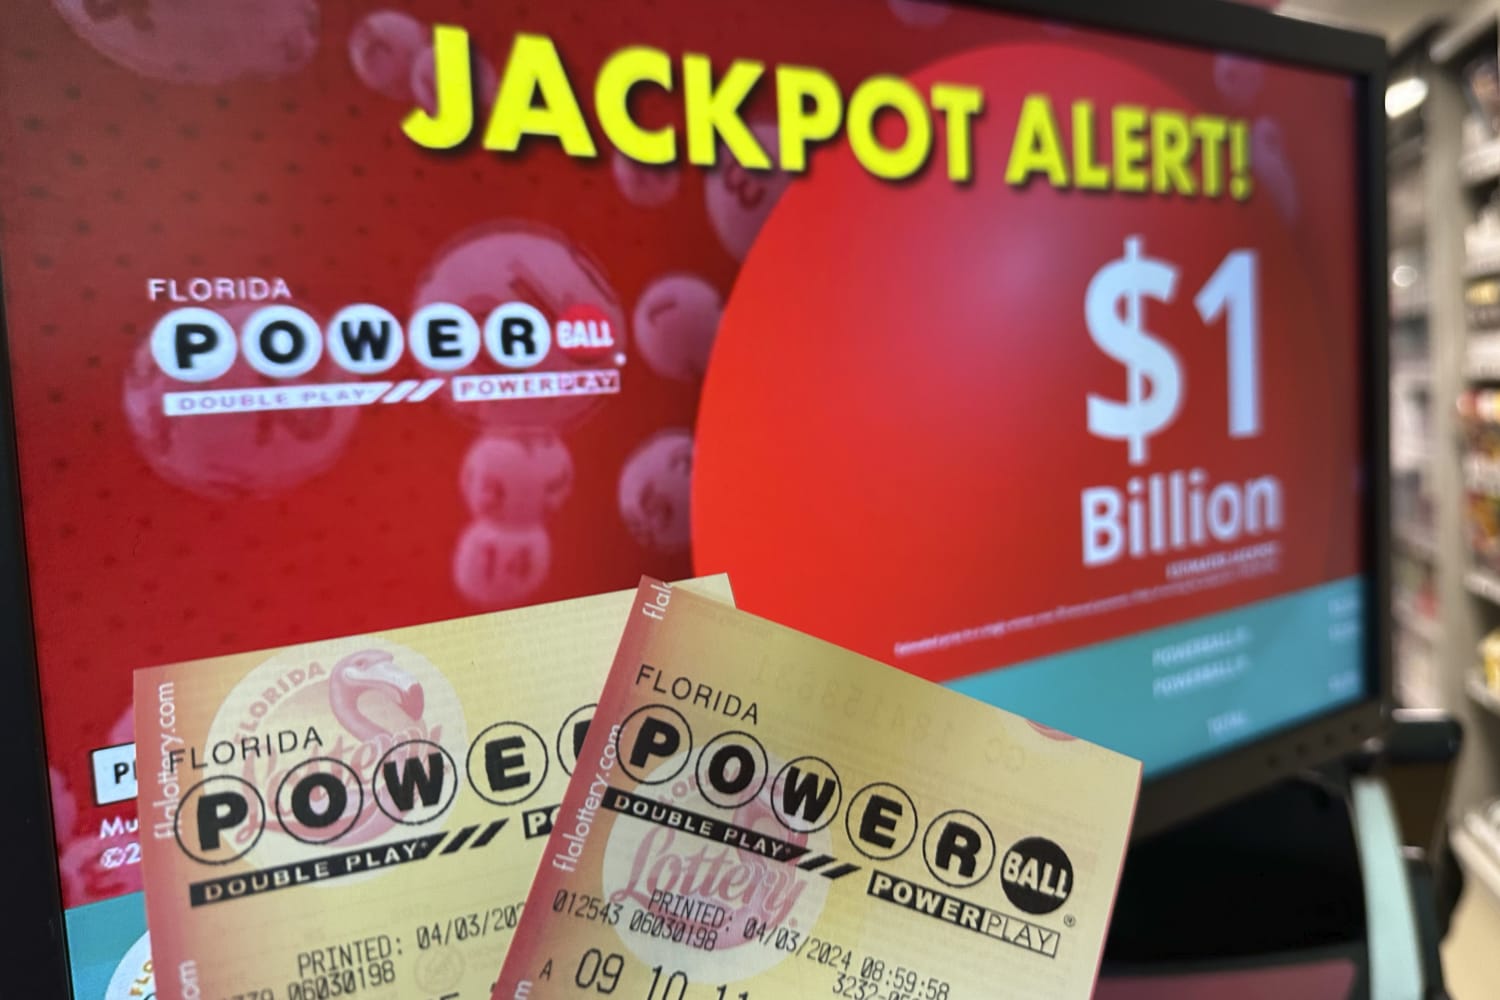 The $1.3 billion Powerball jackpot drawing was delayed due to a ticket verification issue